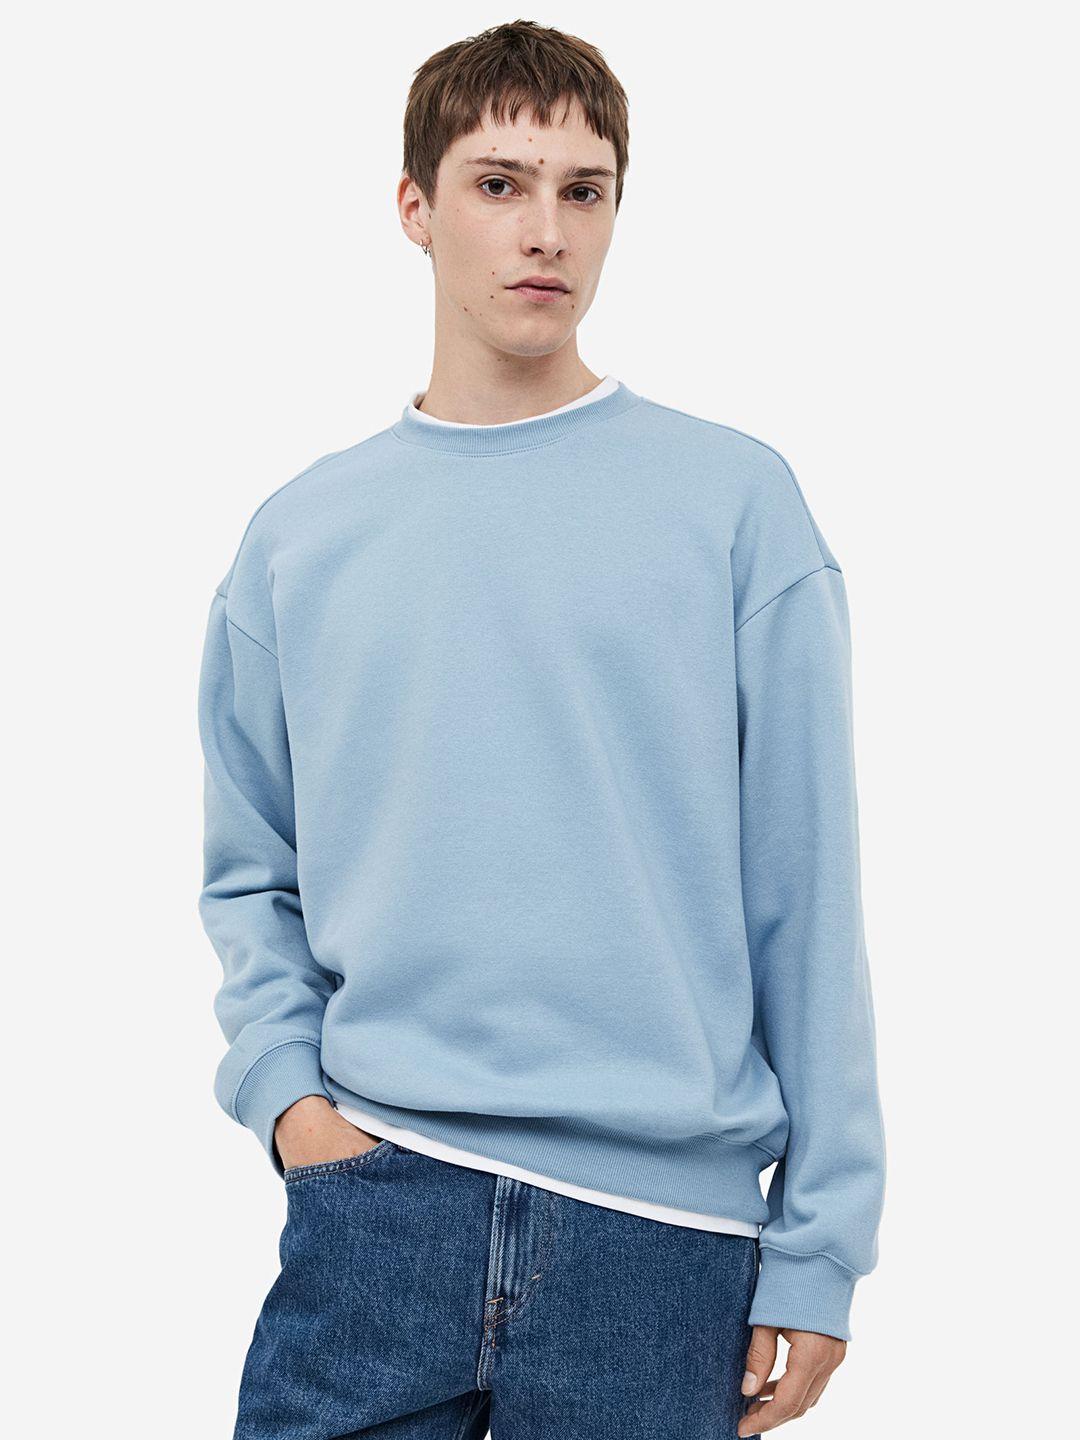 H&M Relaxed Fit Sweatshirts